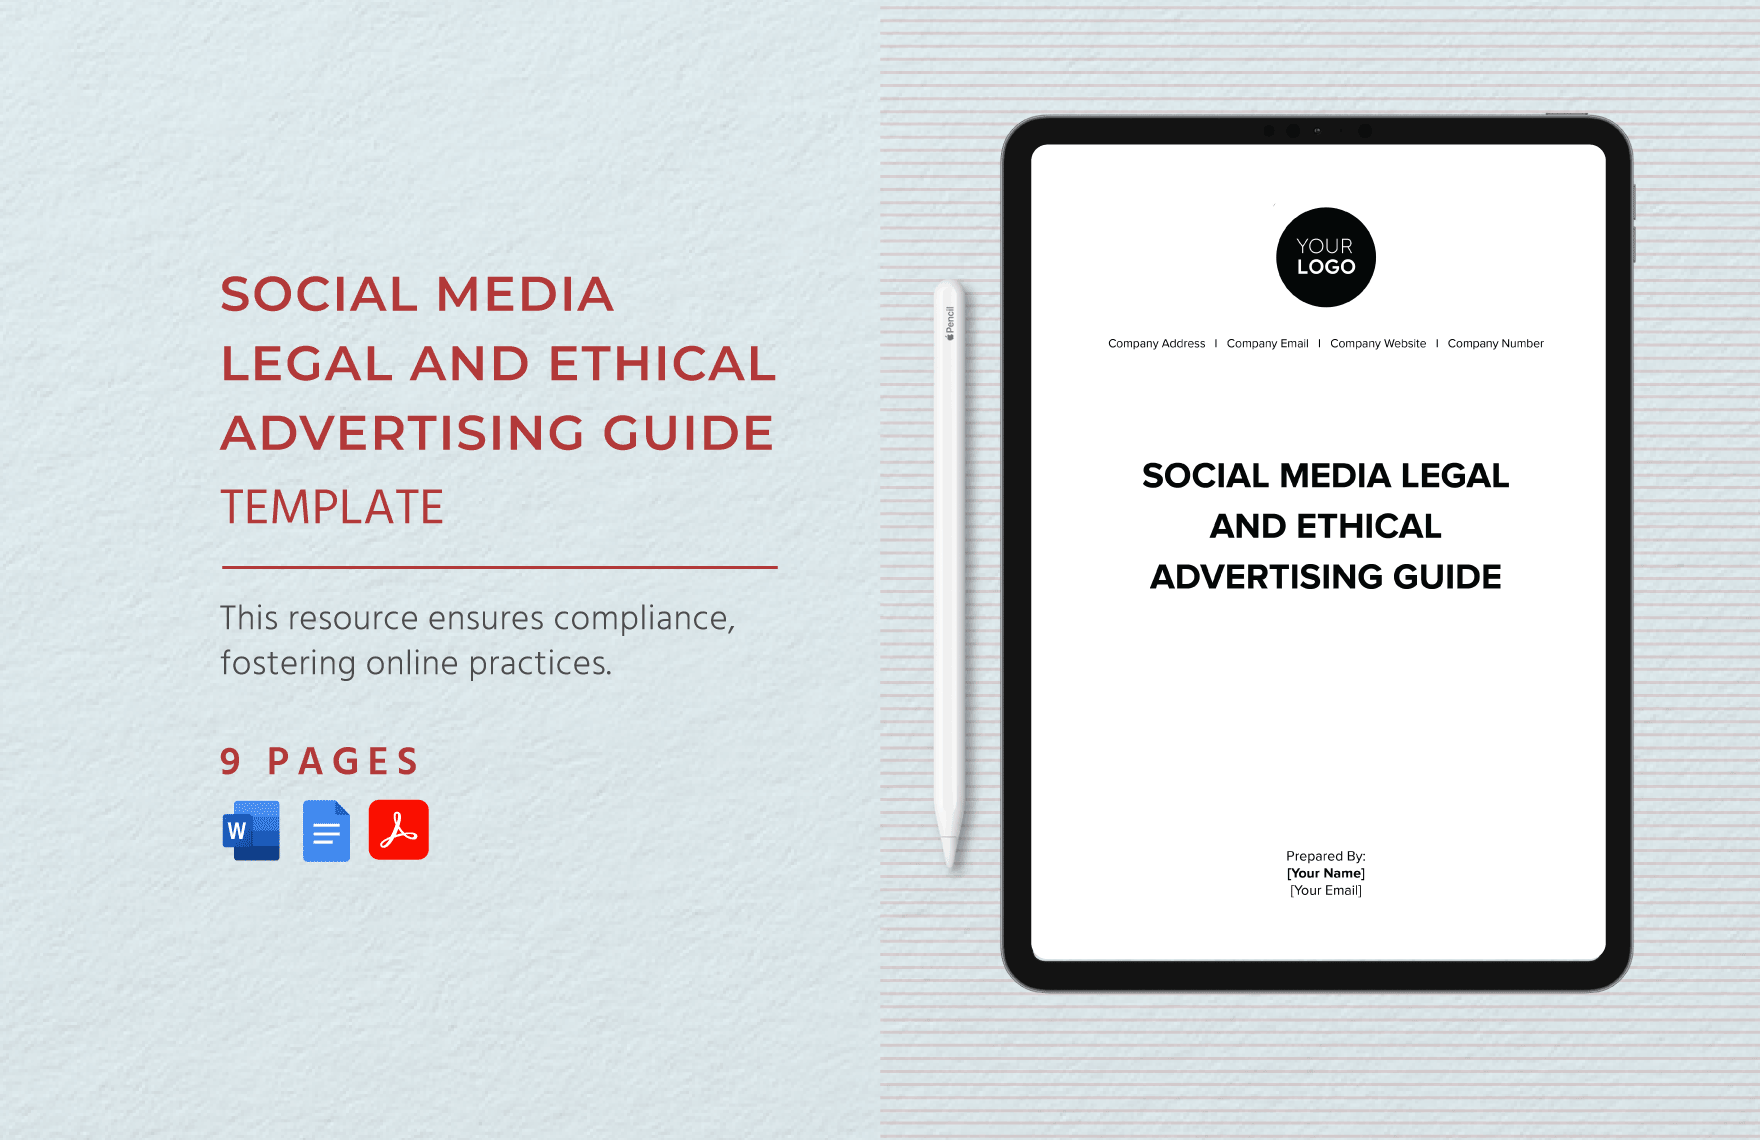 Social Media Legal and Ethical Advertising Guide Template